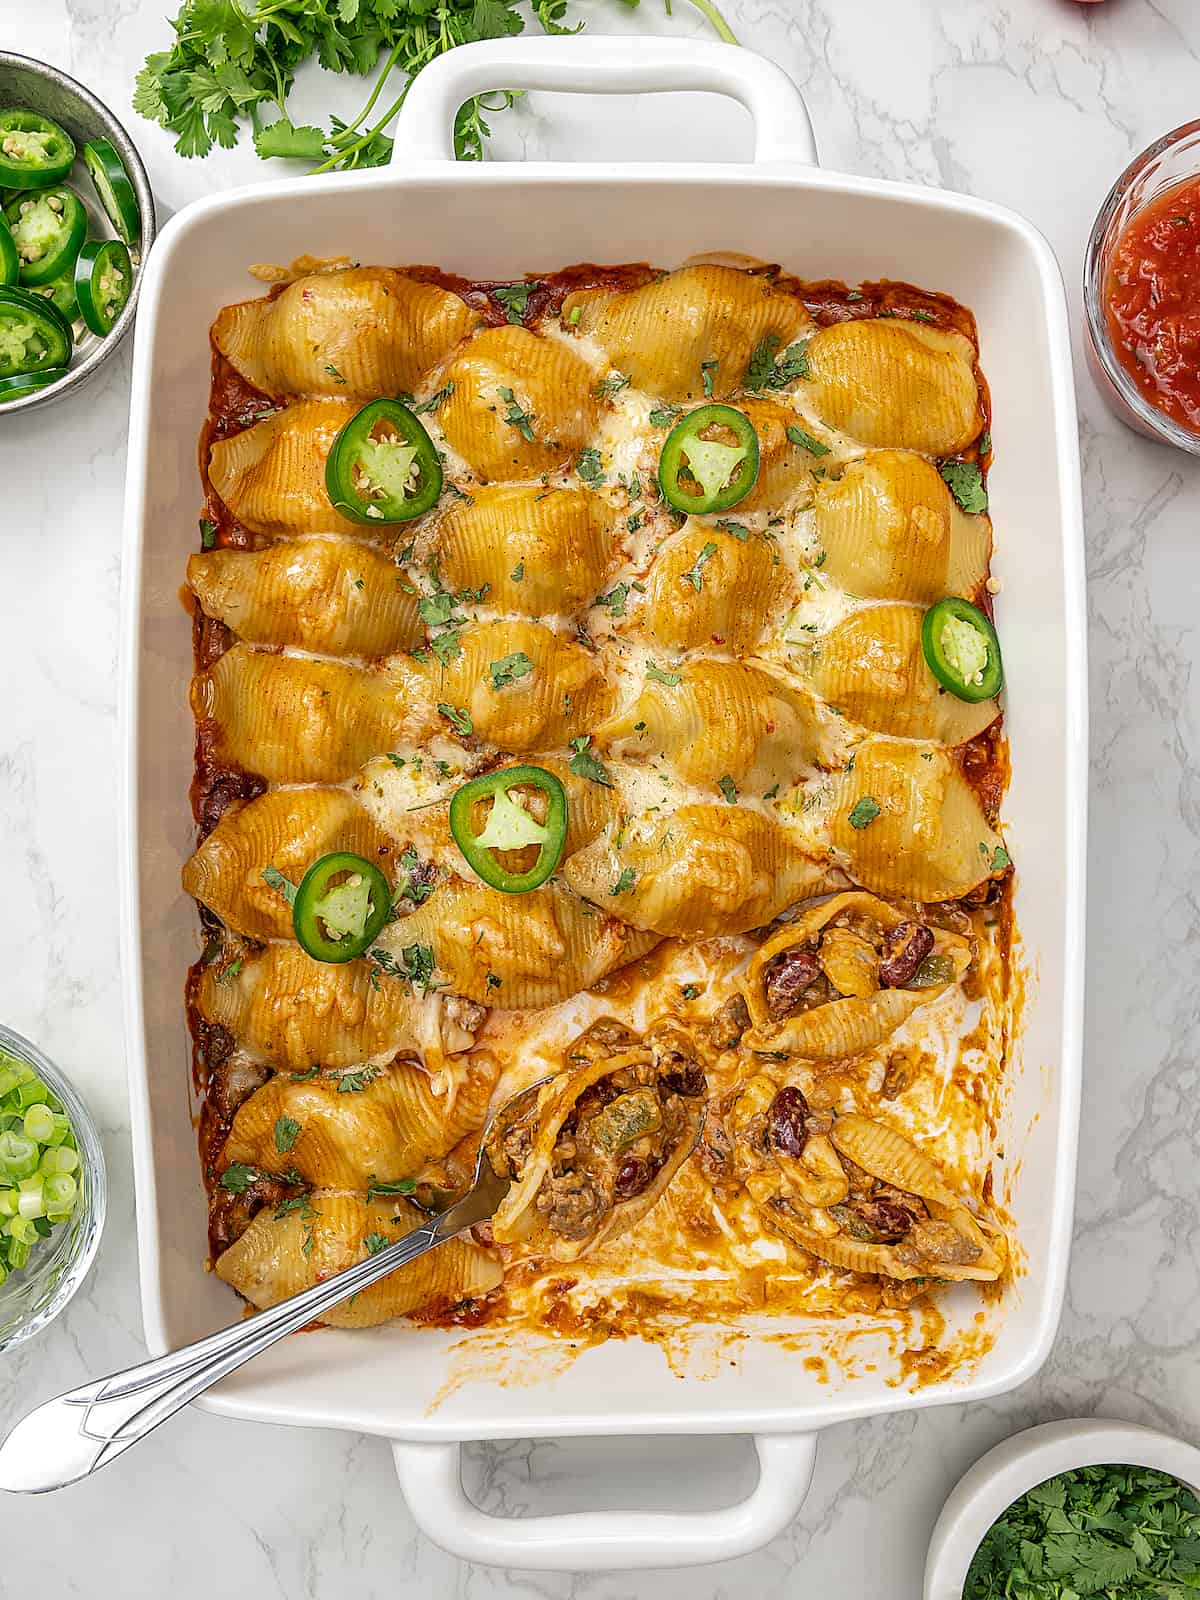 Baking dish of taco stuffed shells with serving spoon